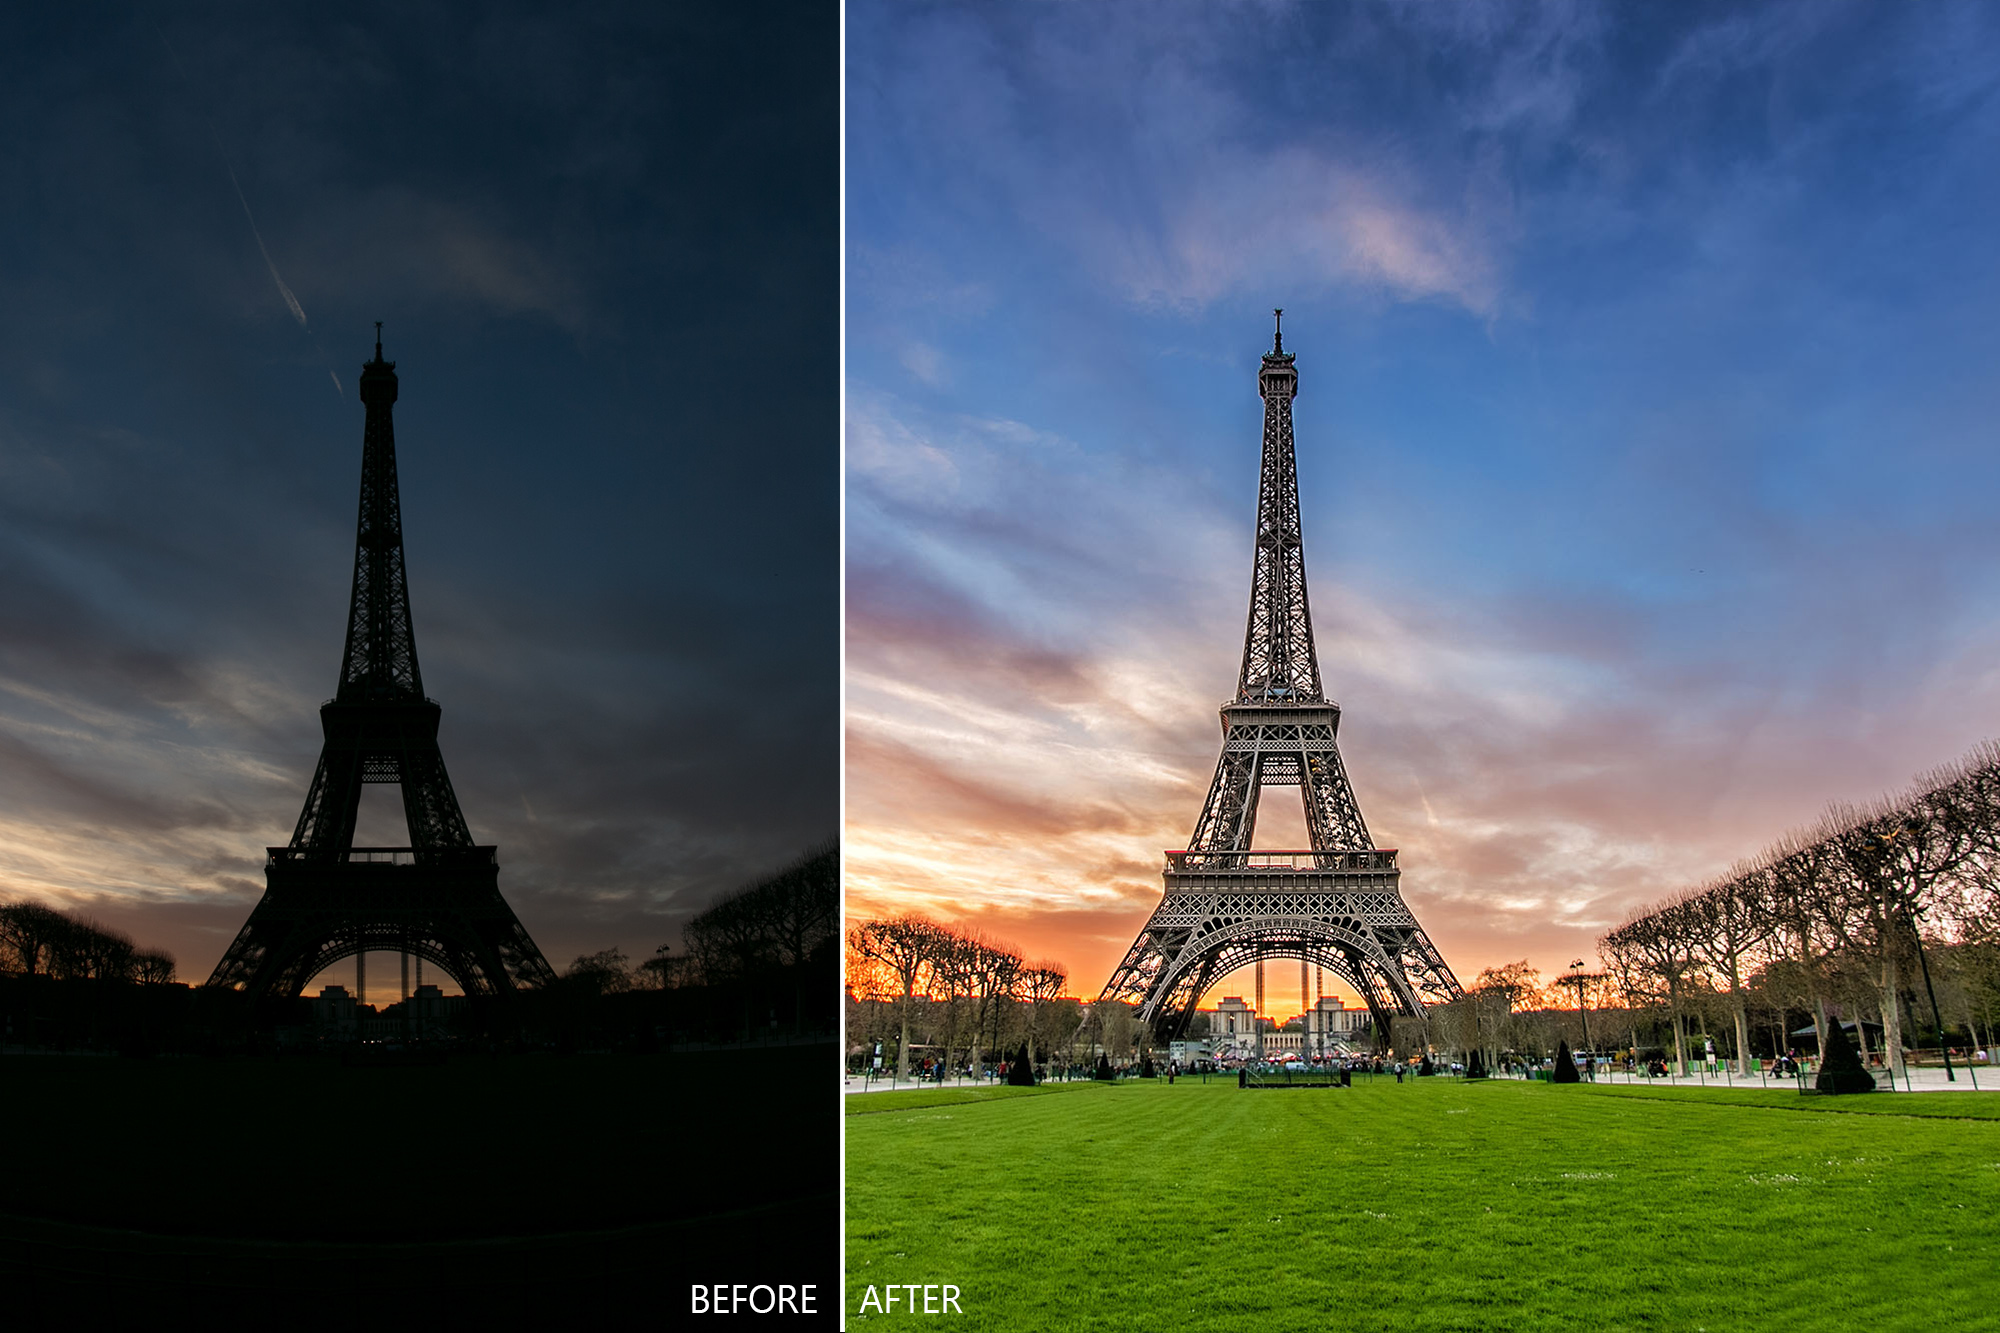 Get Over 20 Travel Photography Tutorials, 500 Presets, and More for $39!